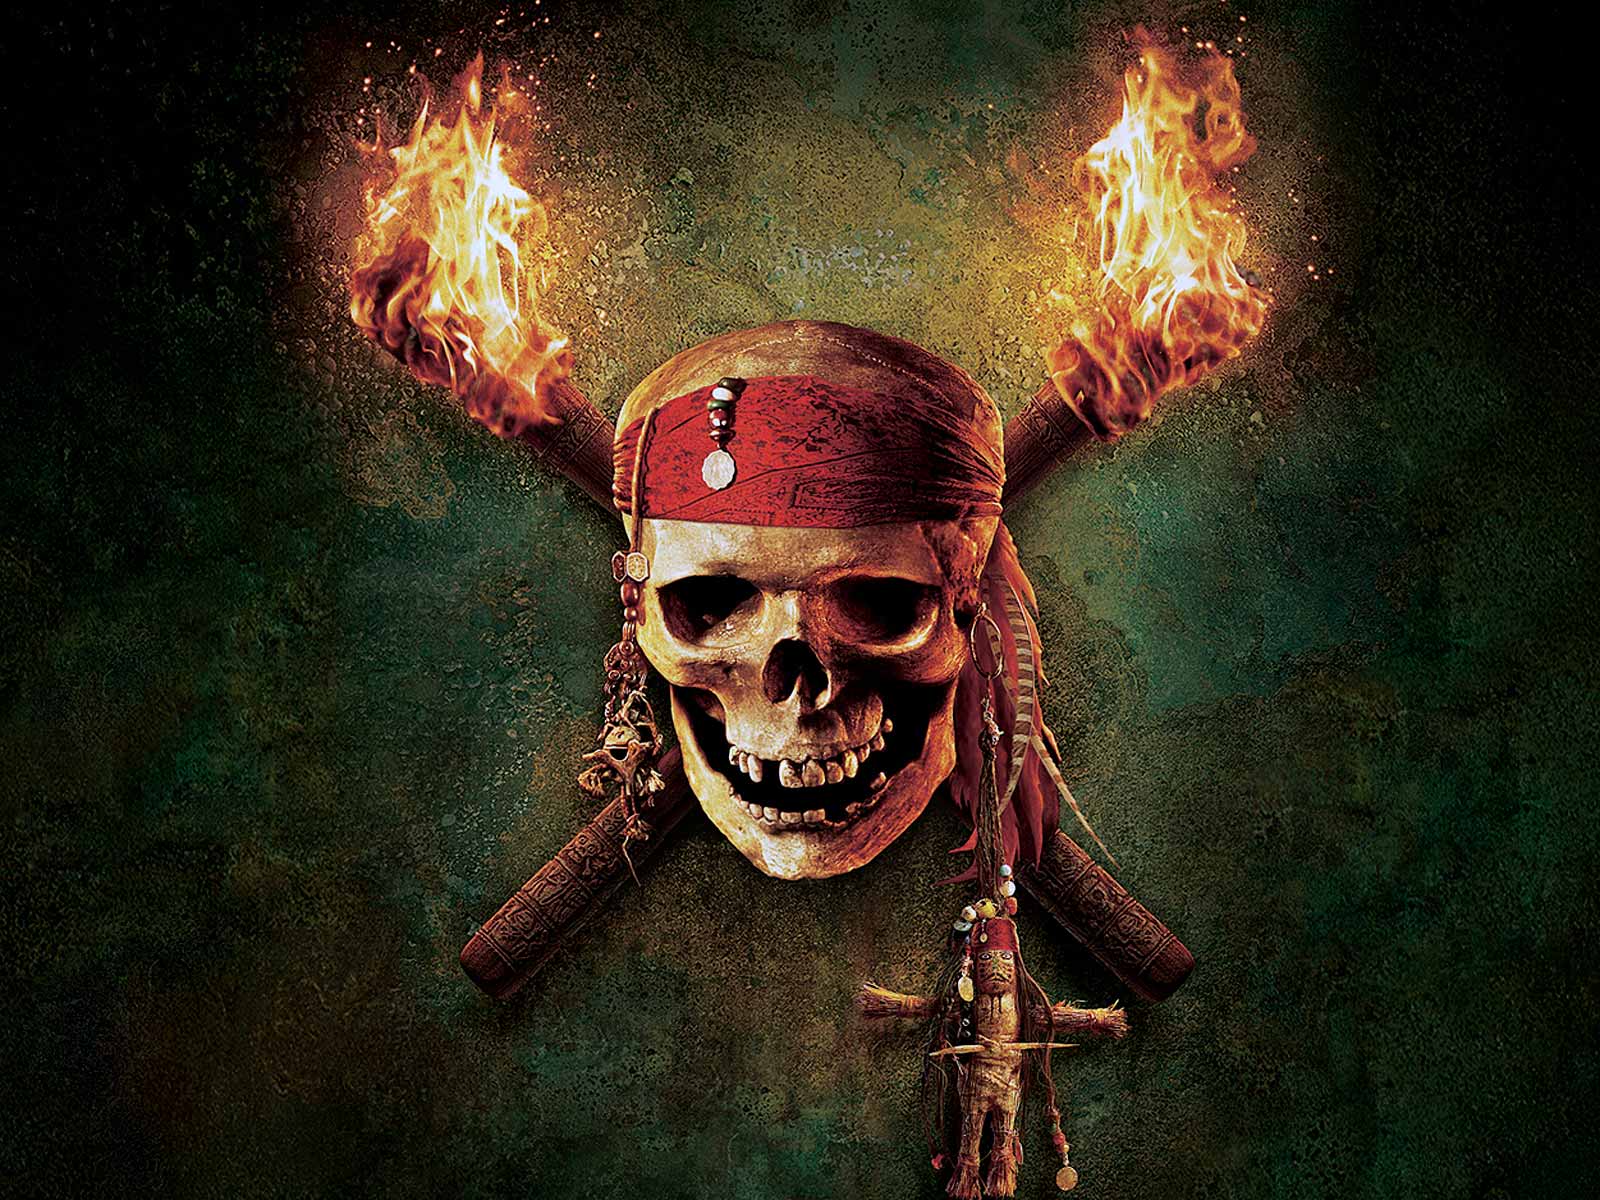 pirates of the caribbean HD wallpaper 1080p HD Gallery